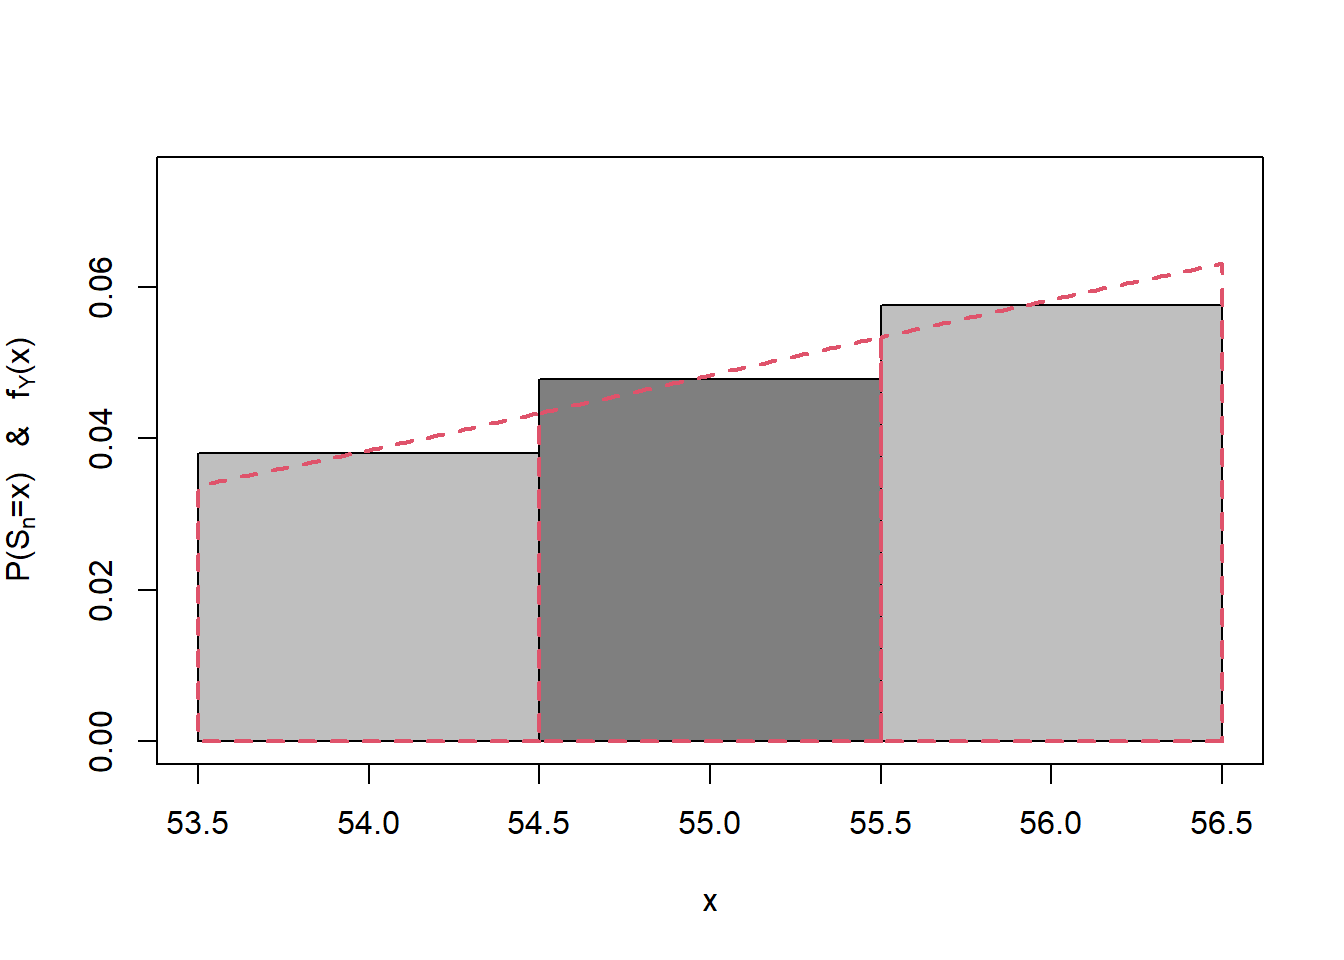 Central limit theorem approximation for the binomial for x=54 to 56.